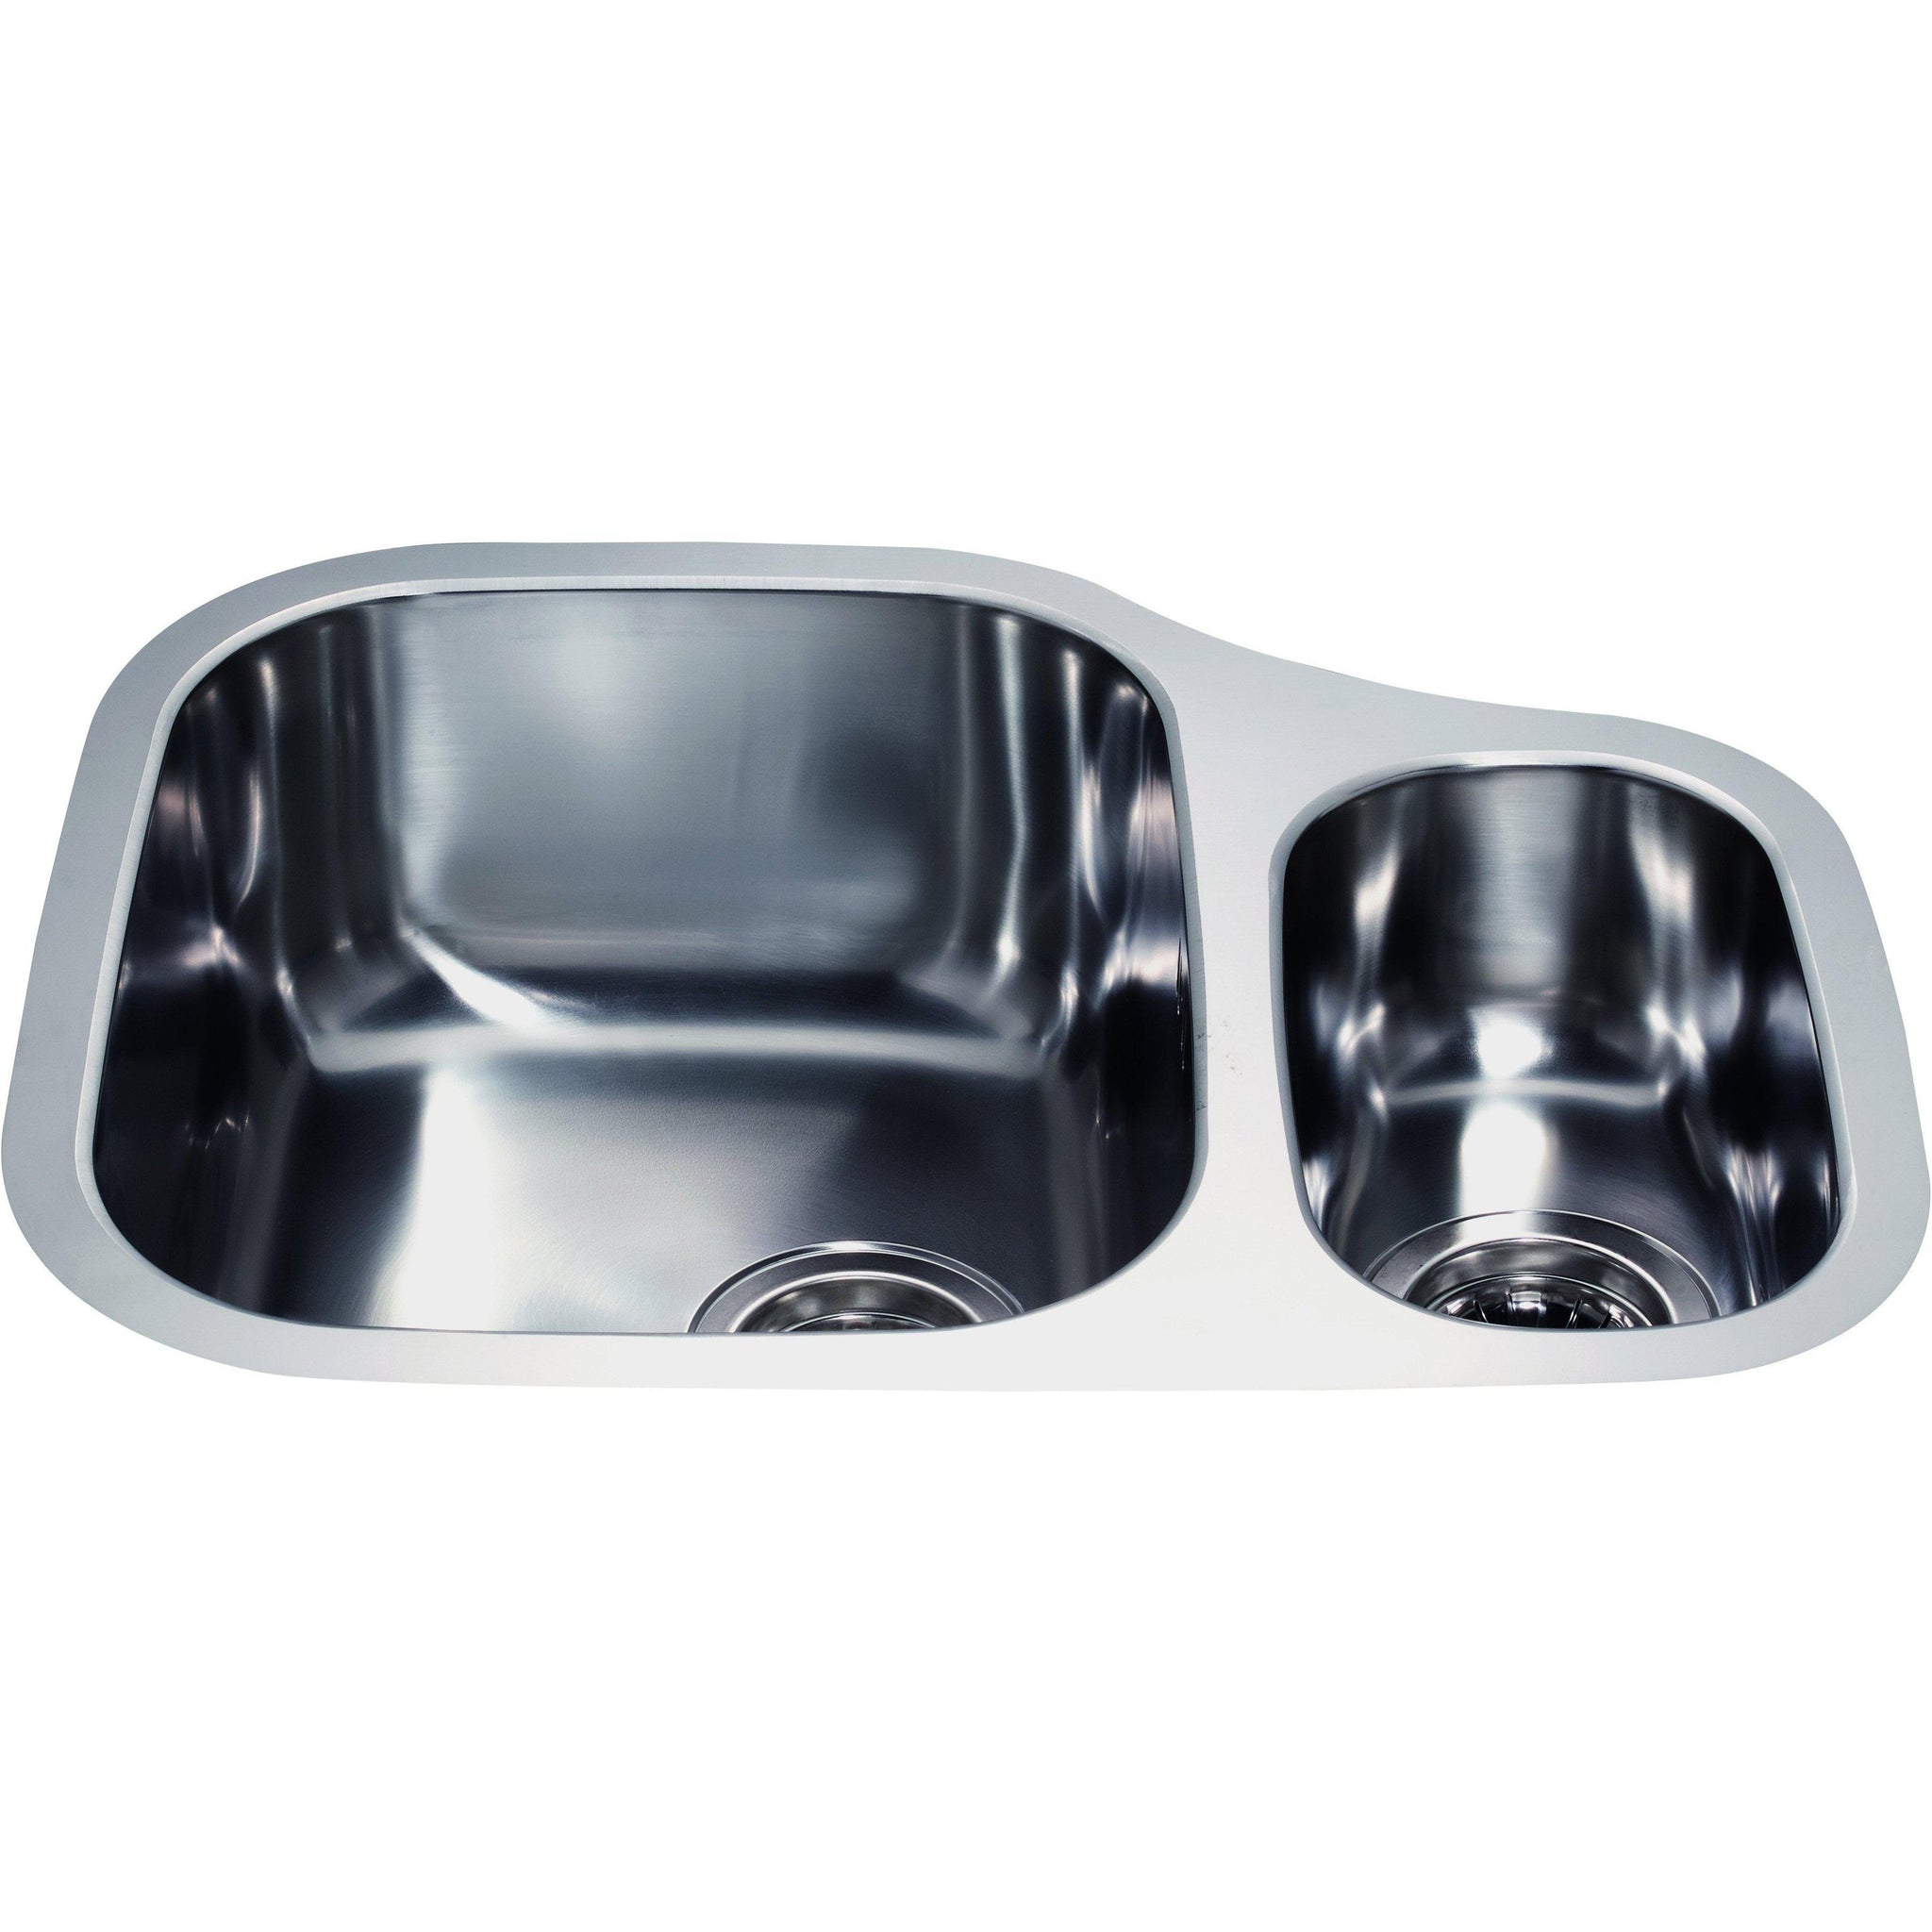 Cda Kcc28ss Undermount Curved 15 Bowl Sink Stainless Steel